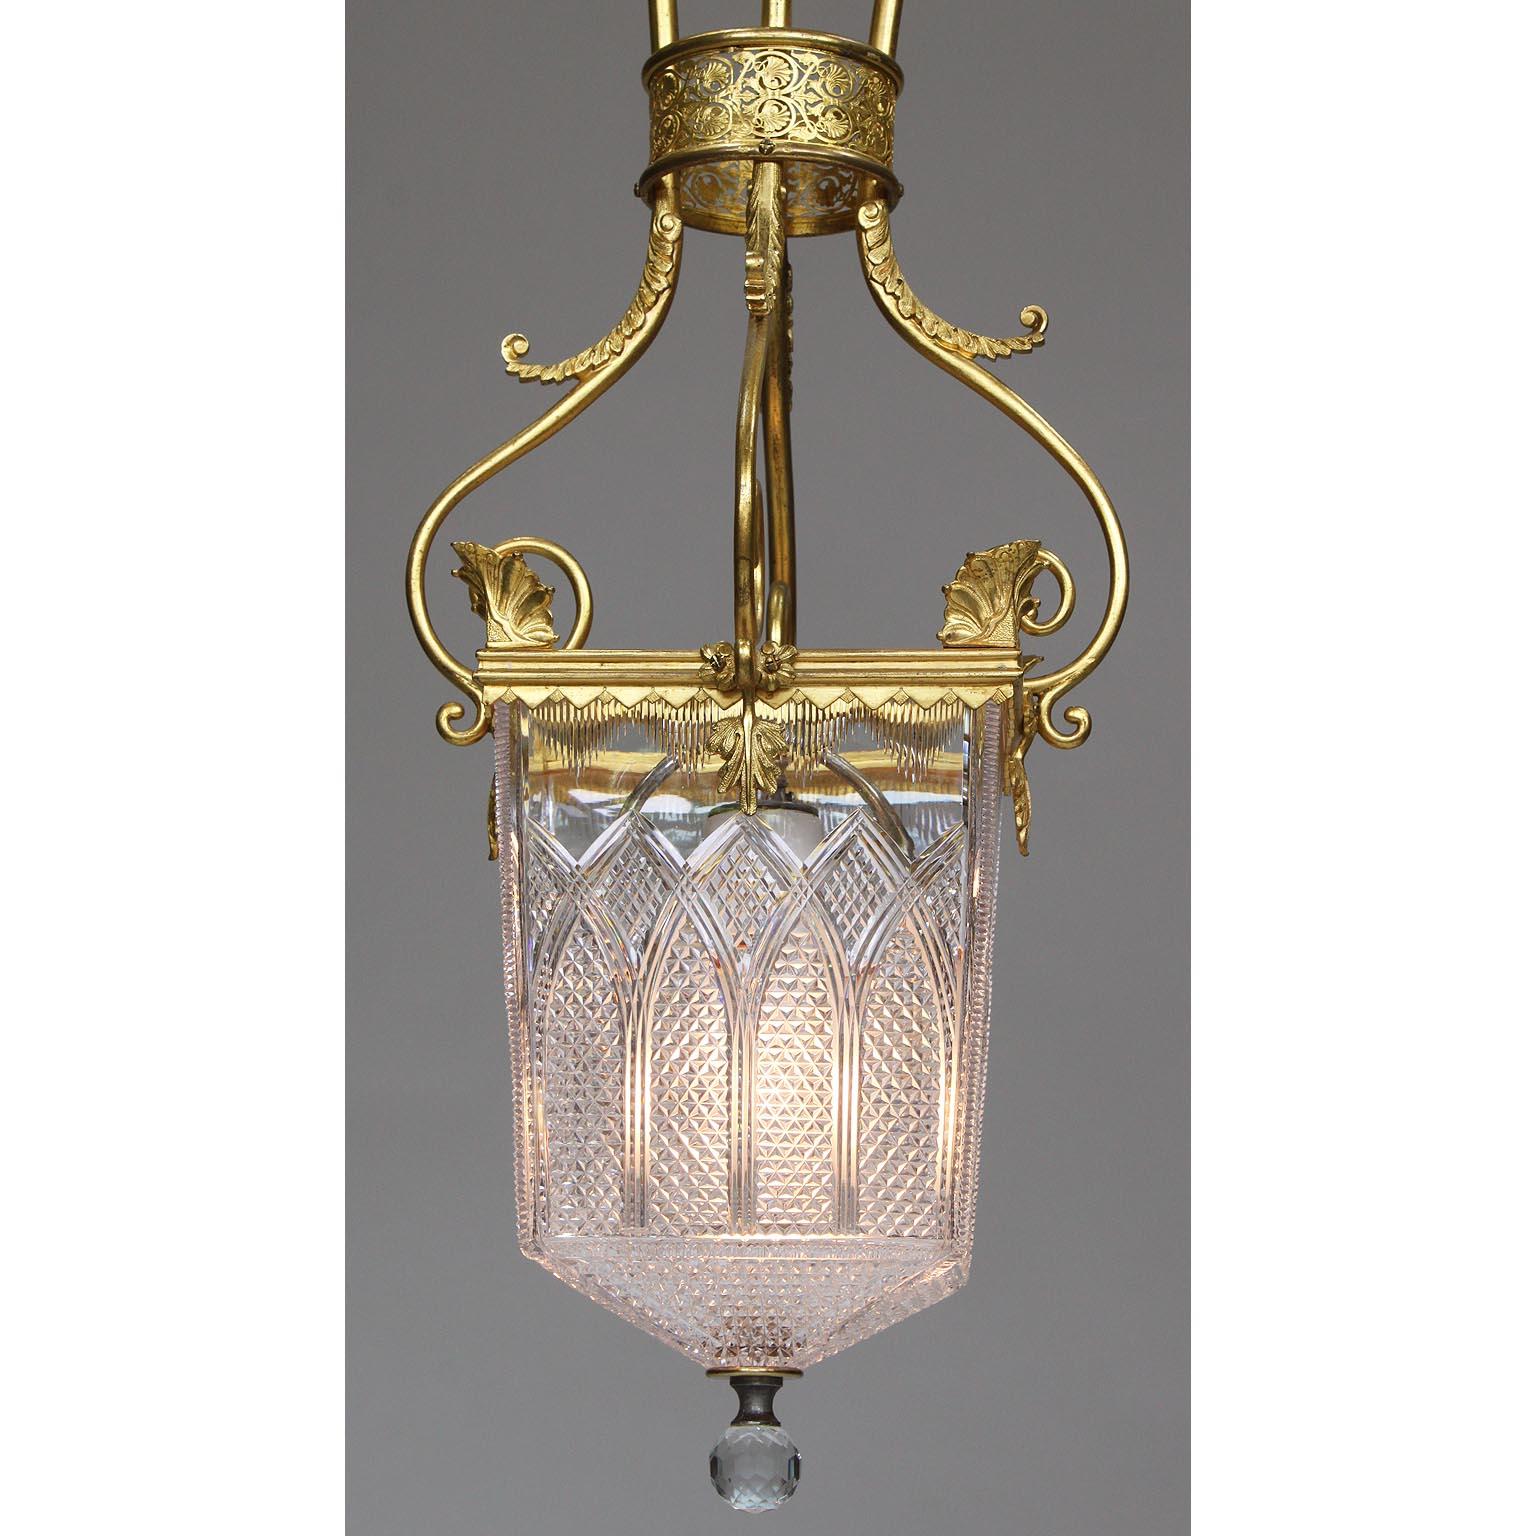 Early 20th Century Fine Pair of Belle Époque Neoclassical Style Gilt-Metal and Cut-Glass Lanterns For Sale